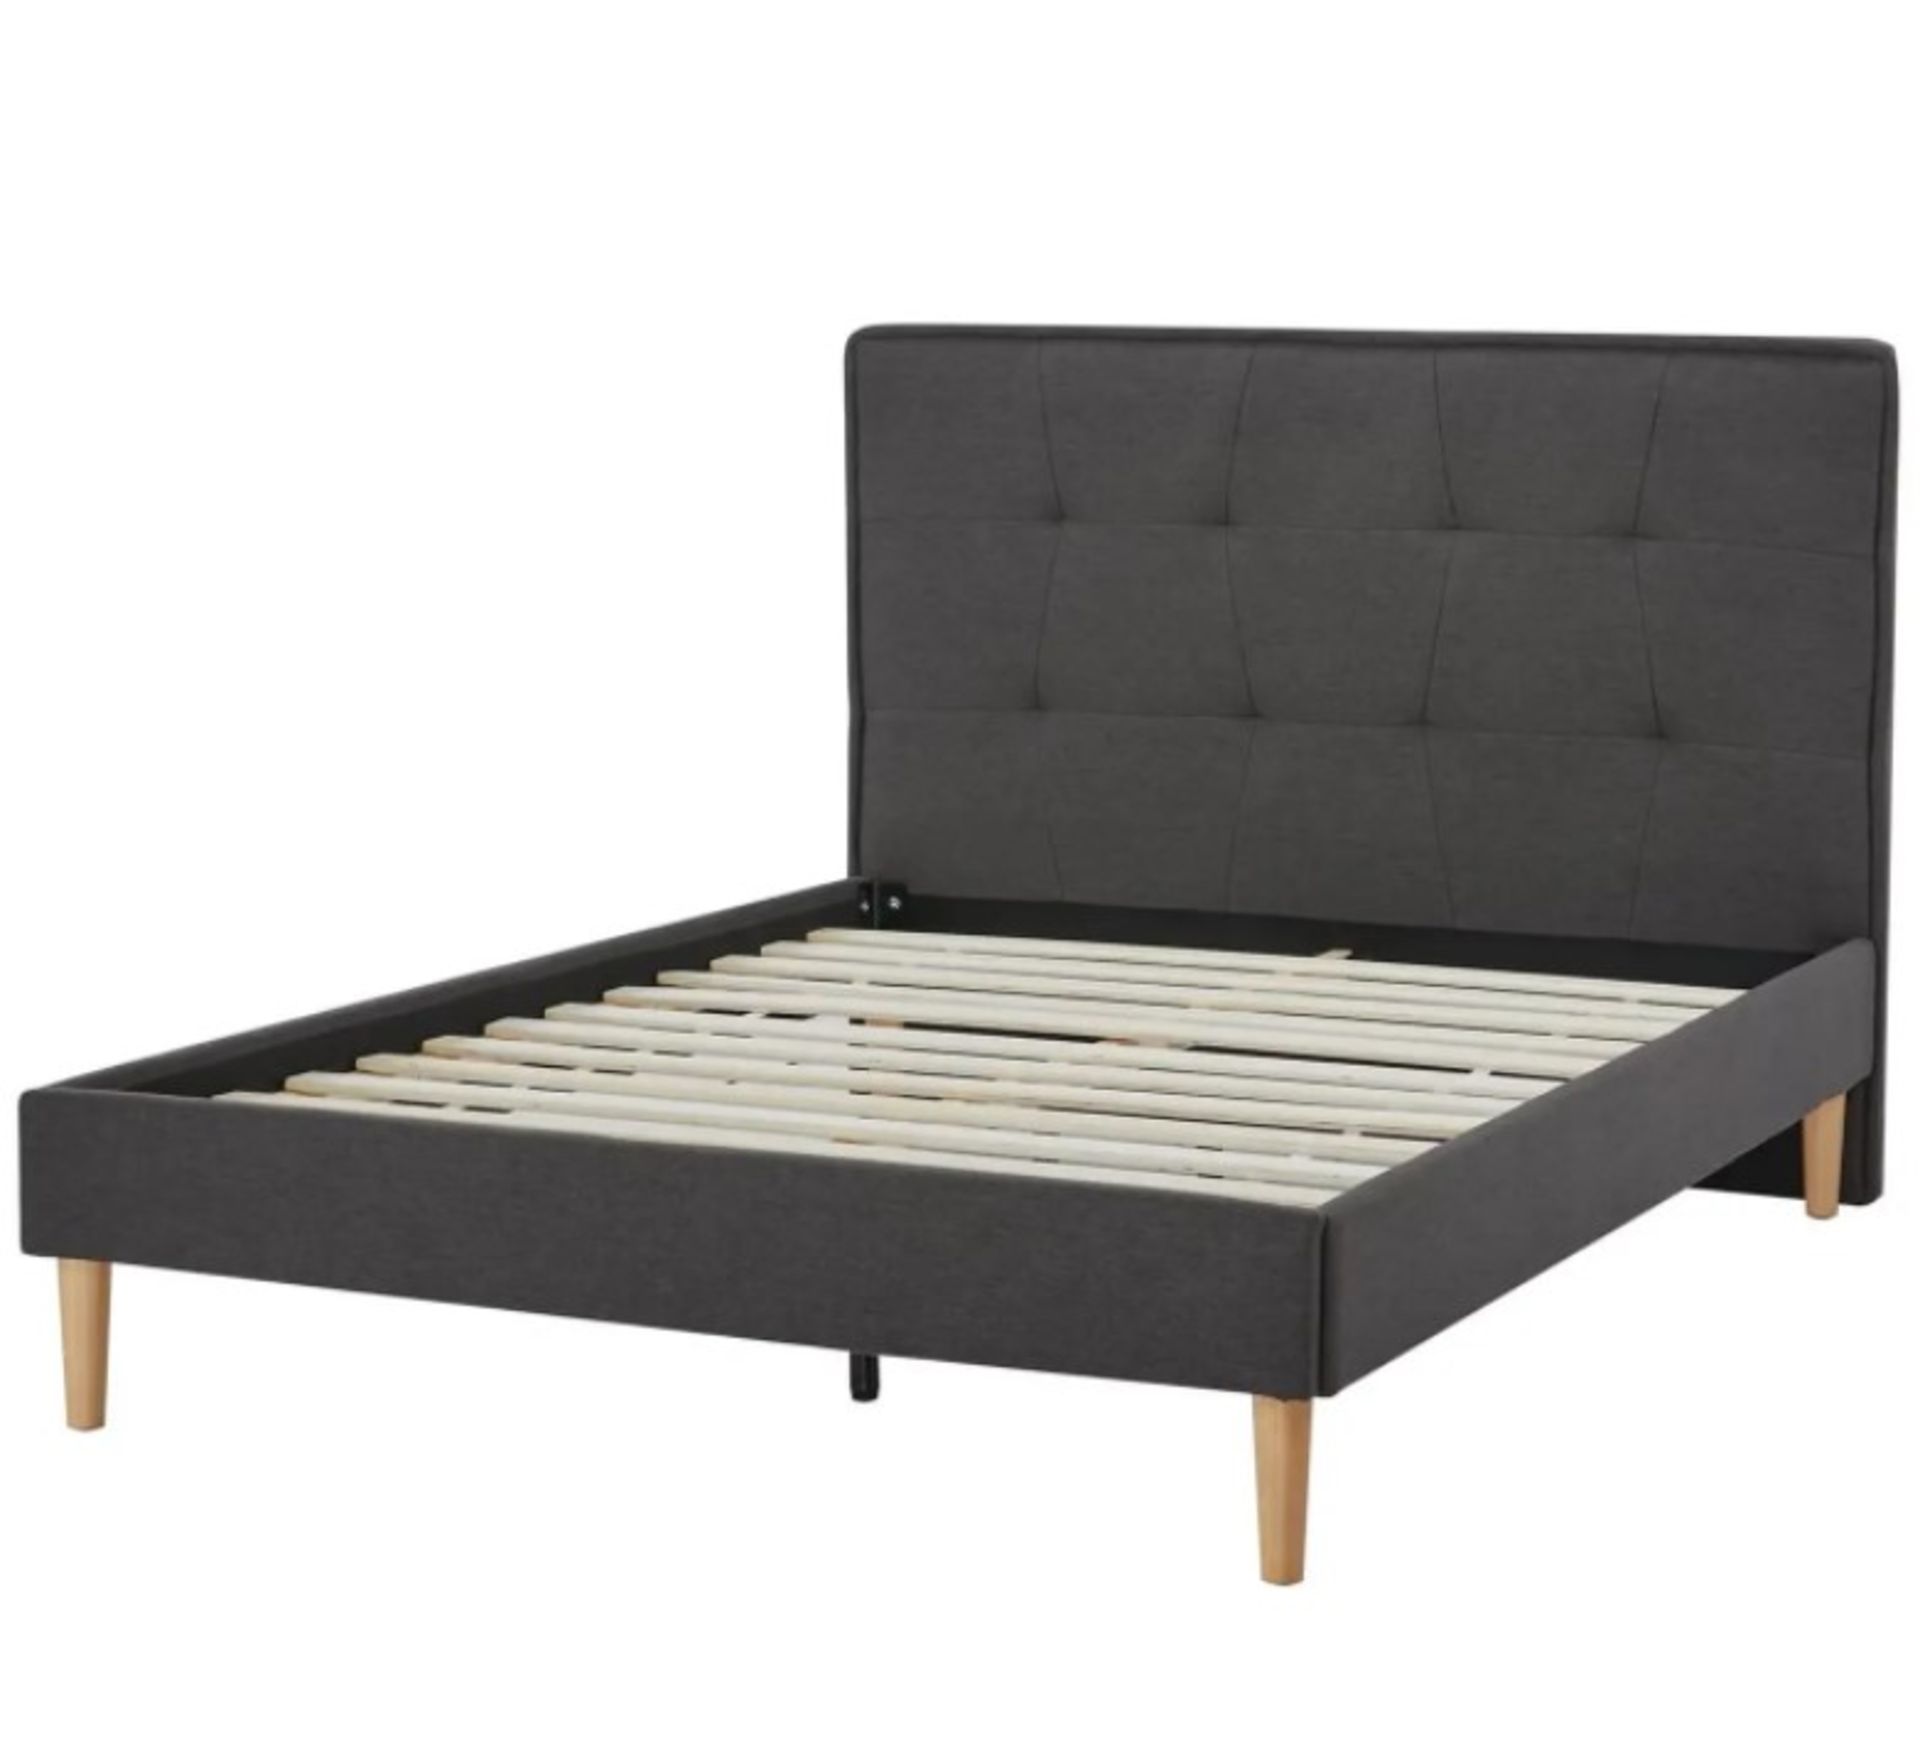 (16) 1x Metro Double Bed Frame Grey RRP £200. (H110x W143x L208cm). This Lot Contains 3x Units – Bo - Image 2 of 5